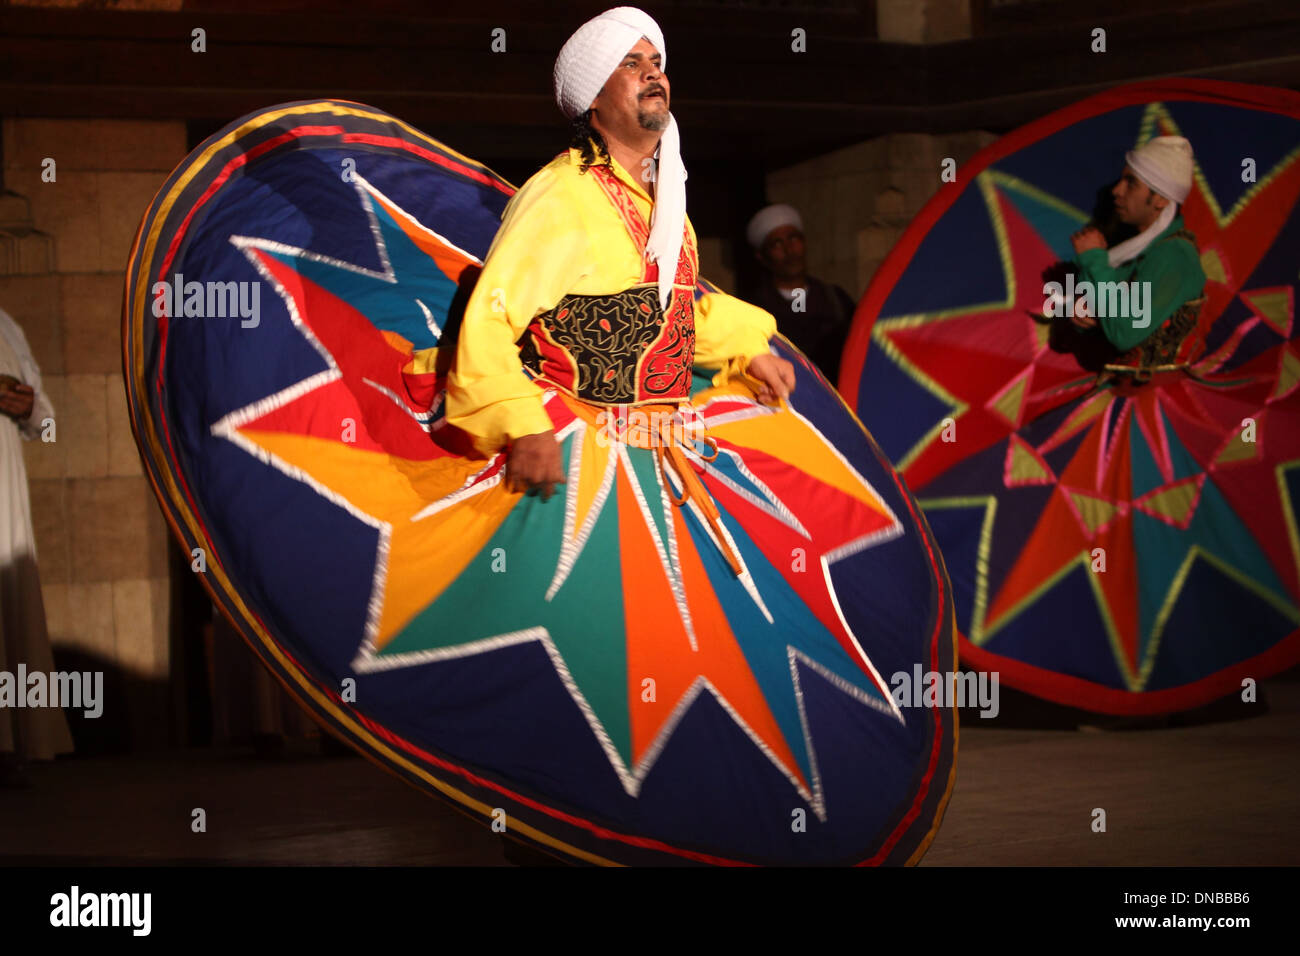 whirling dervish (Tanura show) Cairo Stock Photo